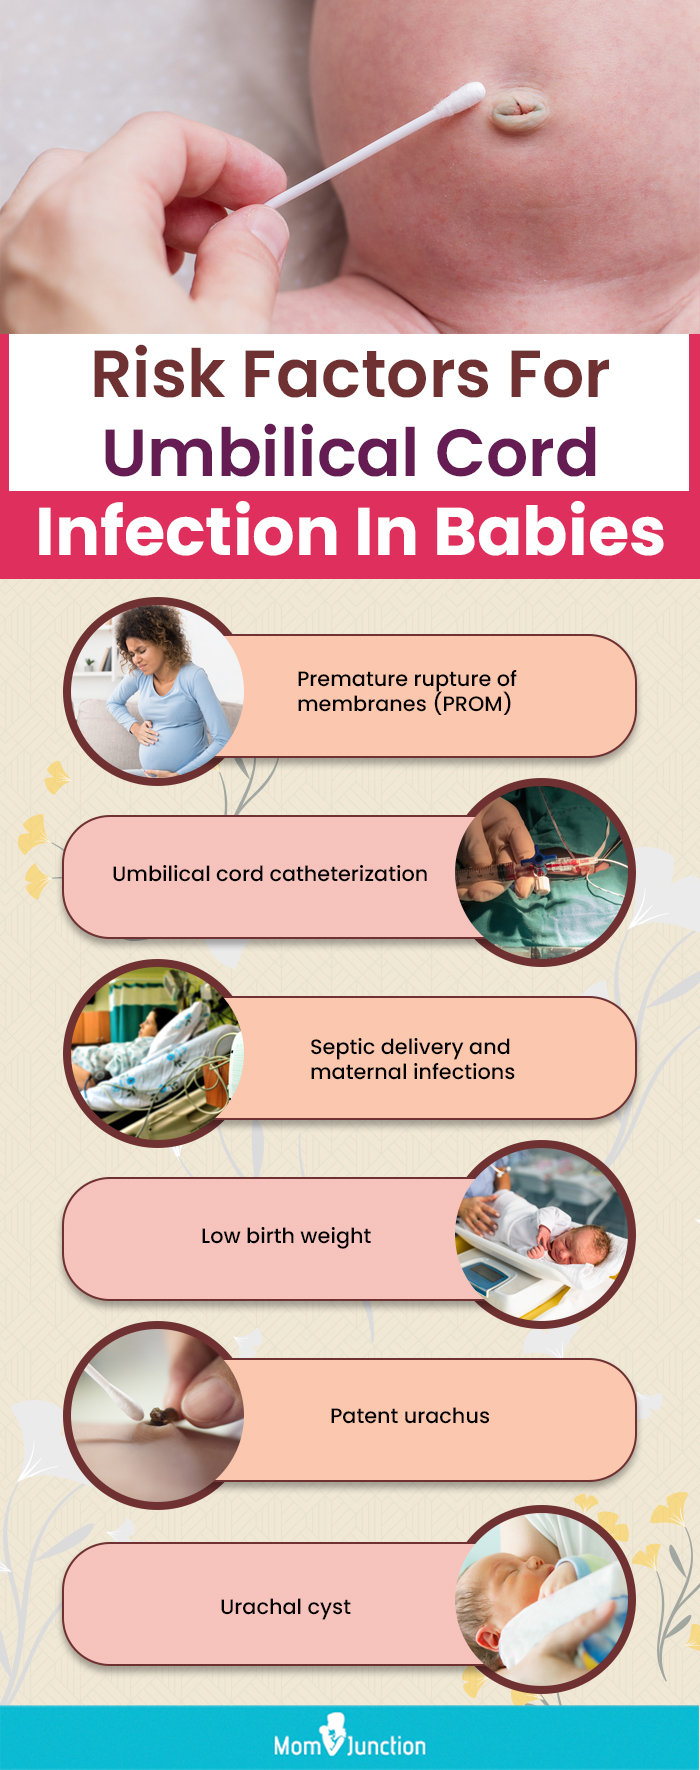 risk factors for umbilical cord infection in babies (infographic)